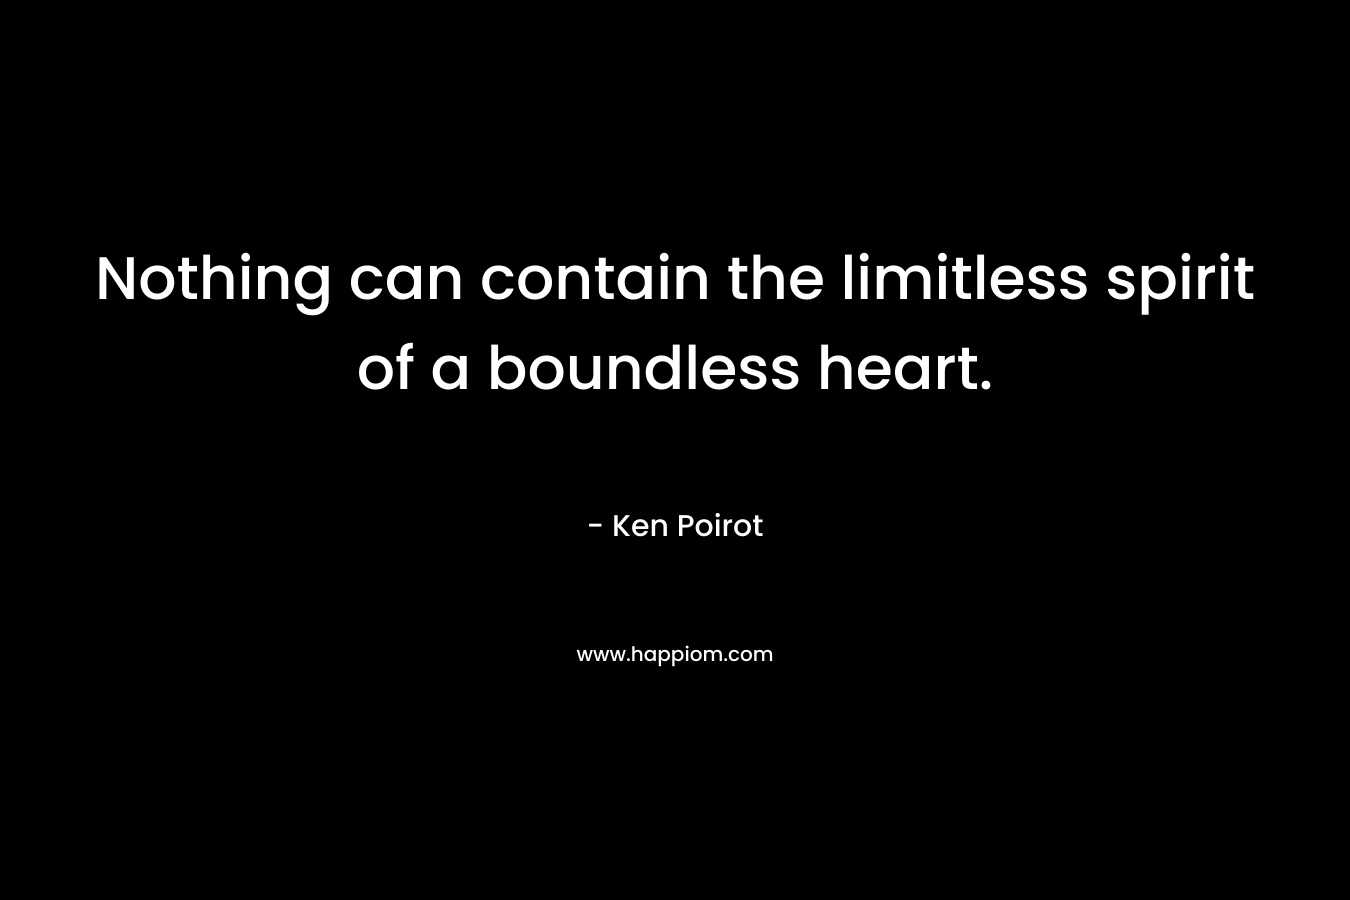 Nothing can contain the limitless spirit of a boundless heart.